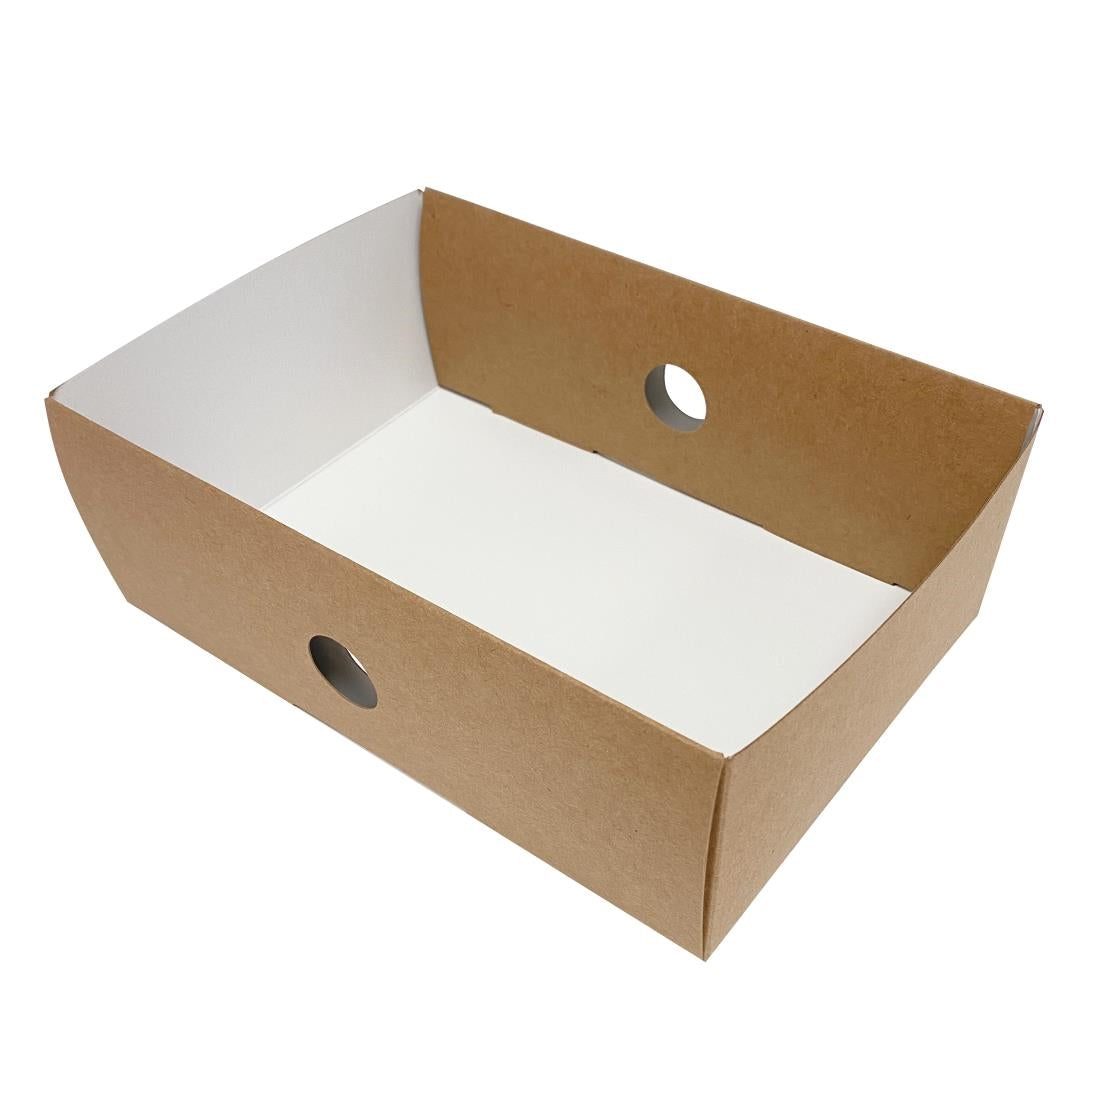 FT674 Fiesta Recyclable Insert For Platter Box 1/4 (Pack of 50) JD Catering Equipment Solutions Ltd